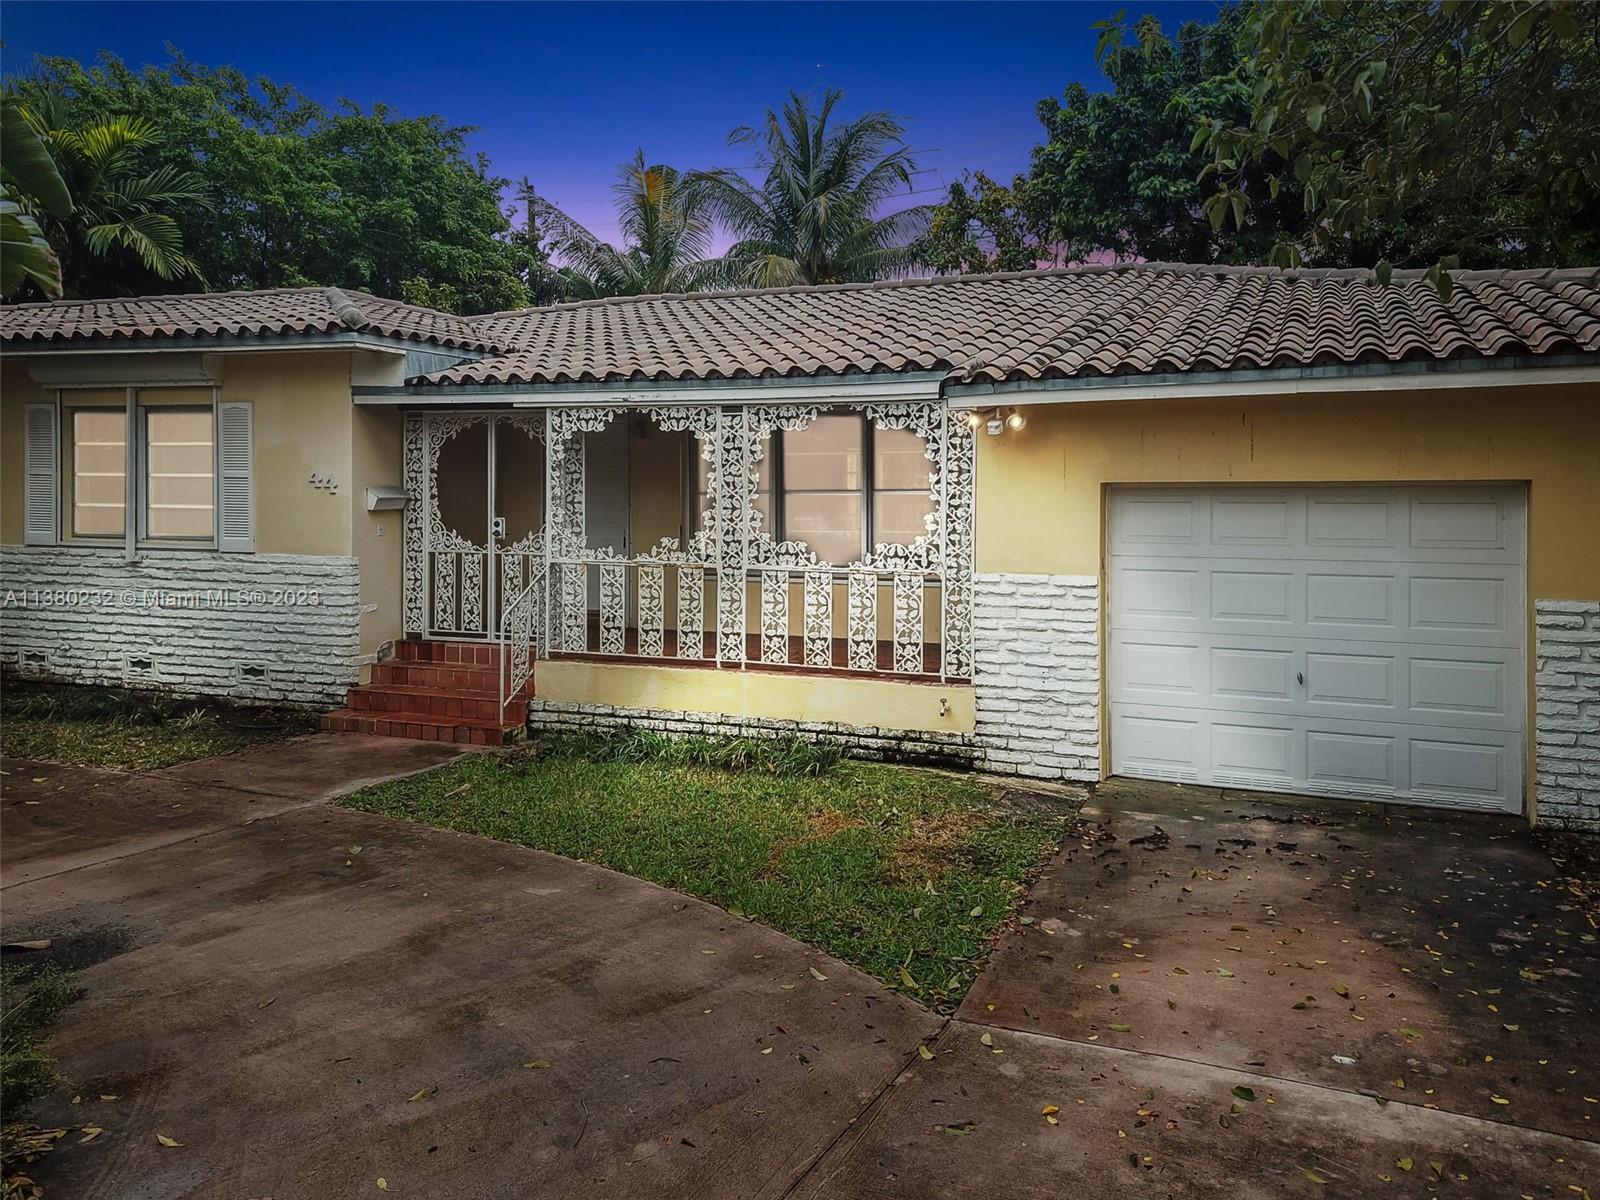 44 Palermo Ave, Coral Gables, FL 33134